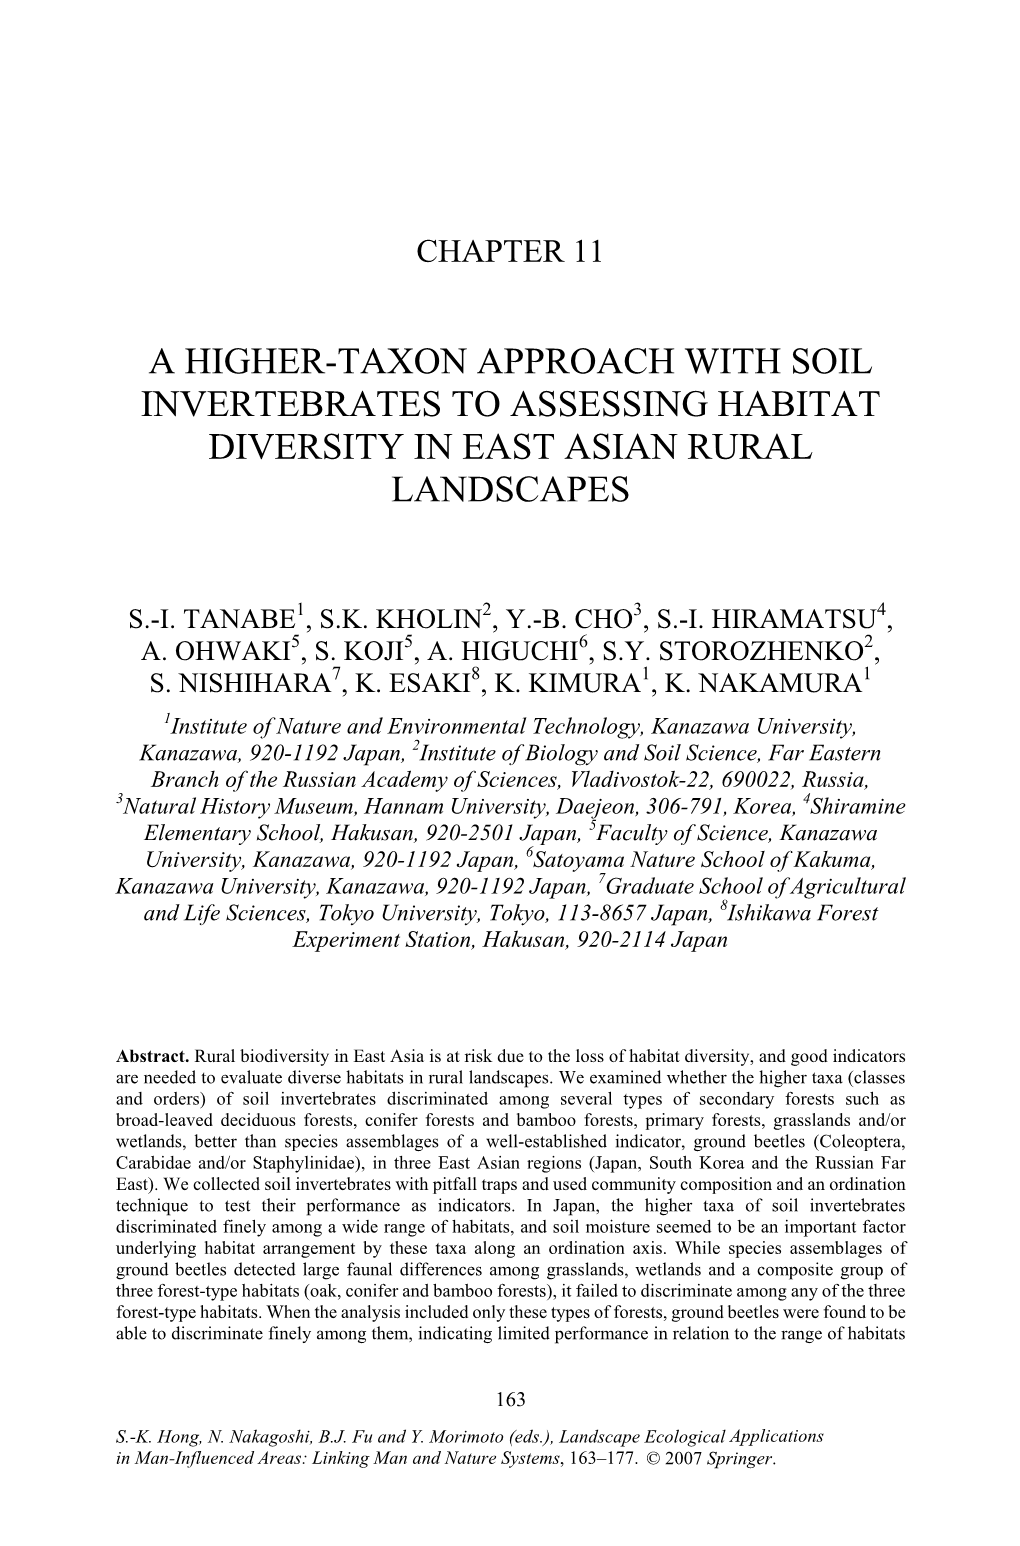 A Higher-Taxon Approach with Soil Invertebrates to Assessing Habitat Diversity in East Asian Rural Landscapes